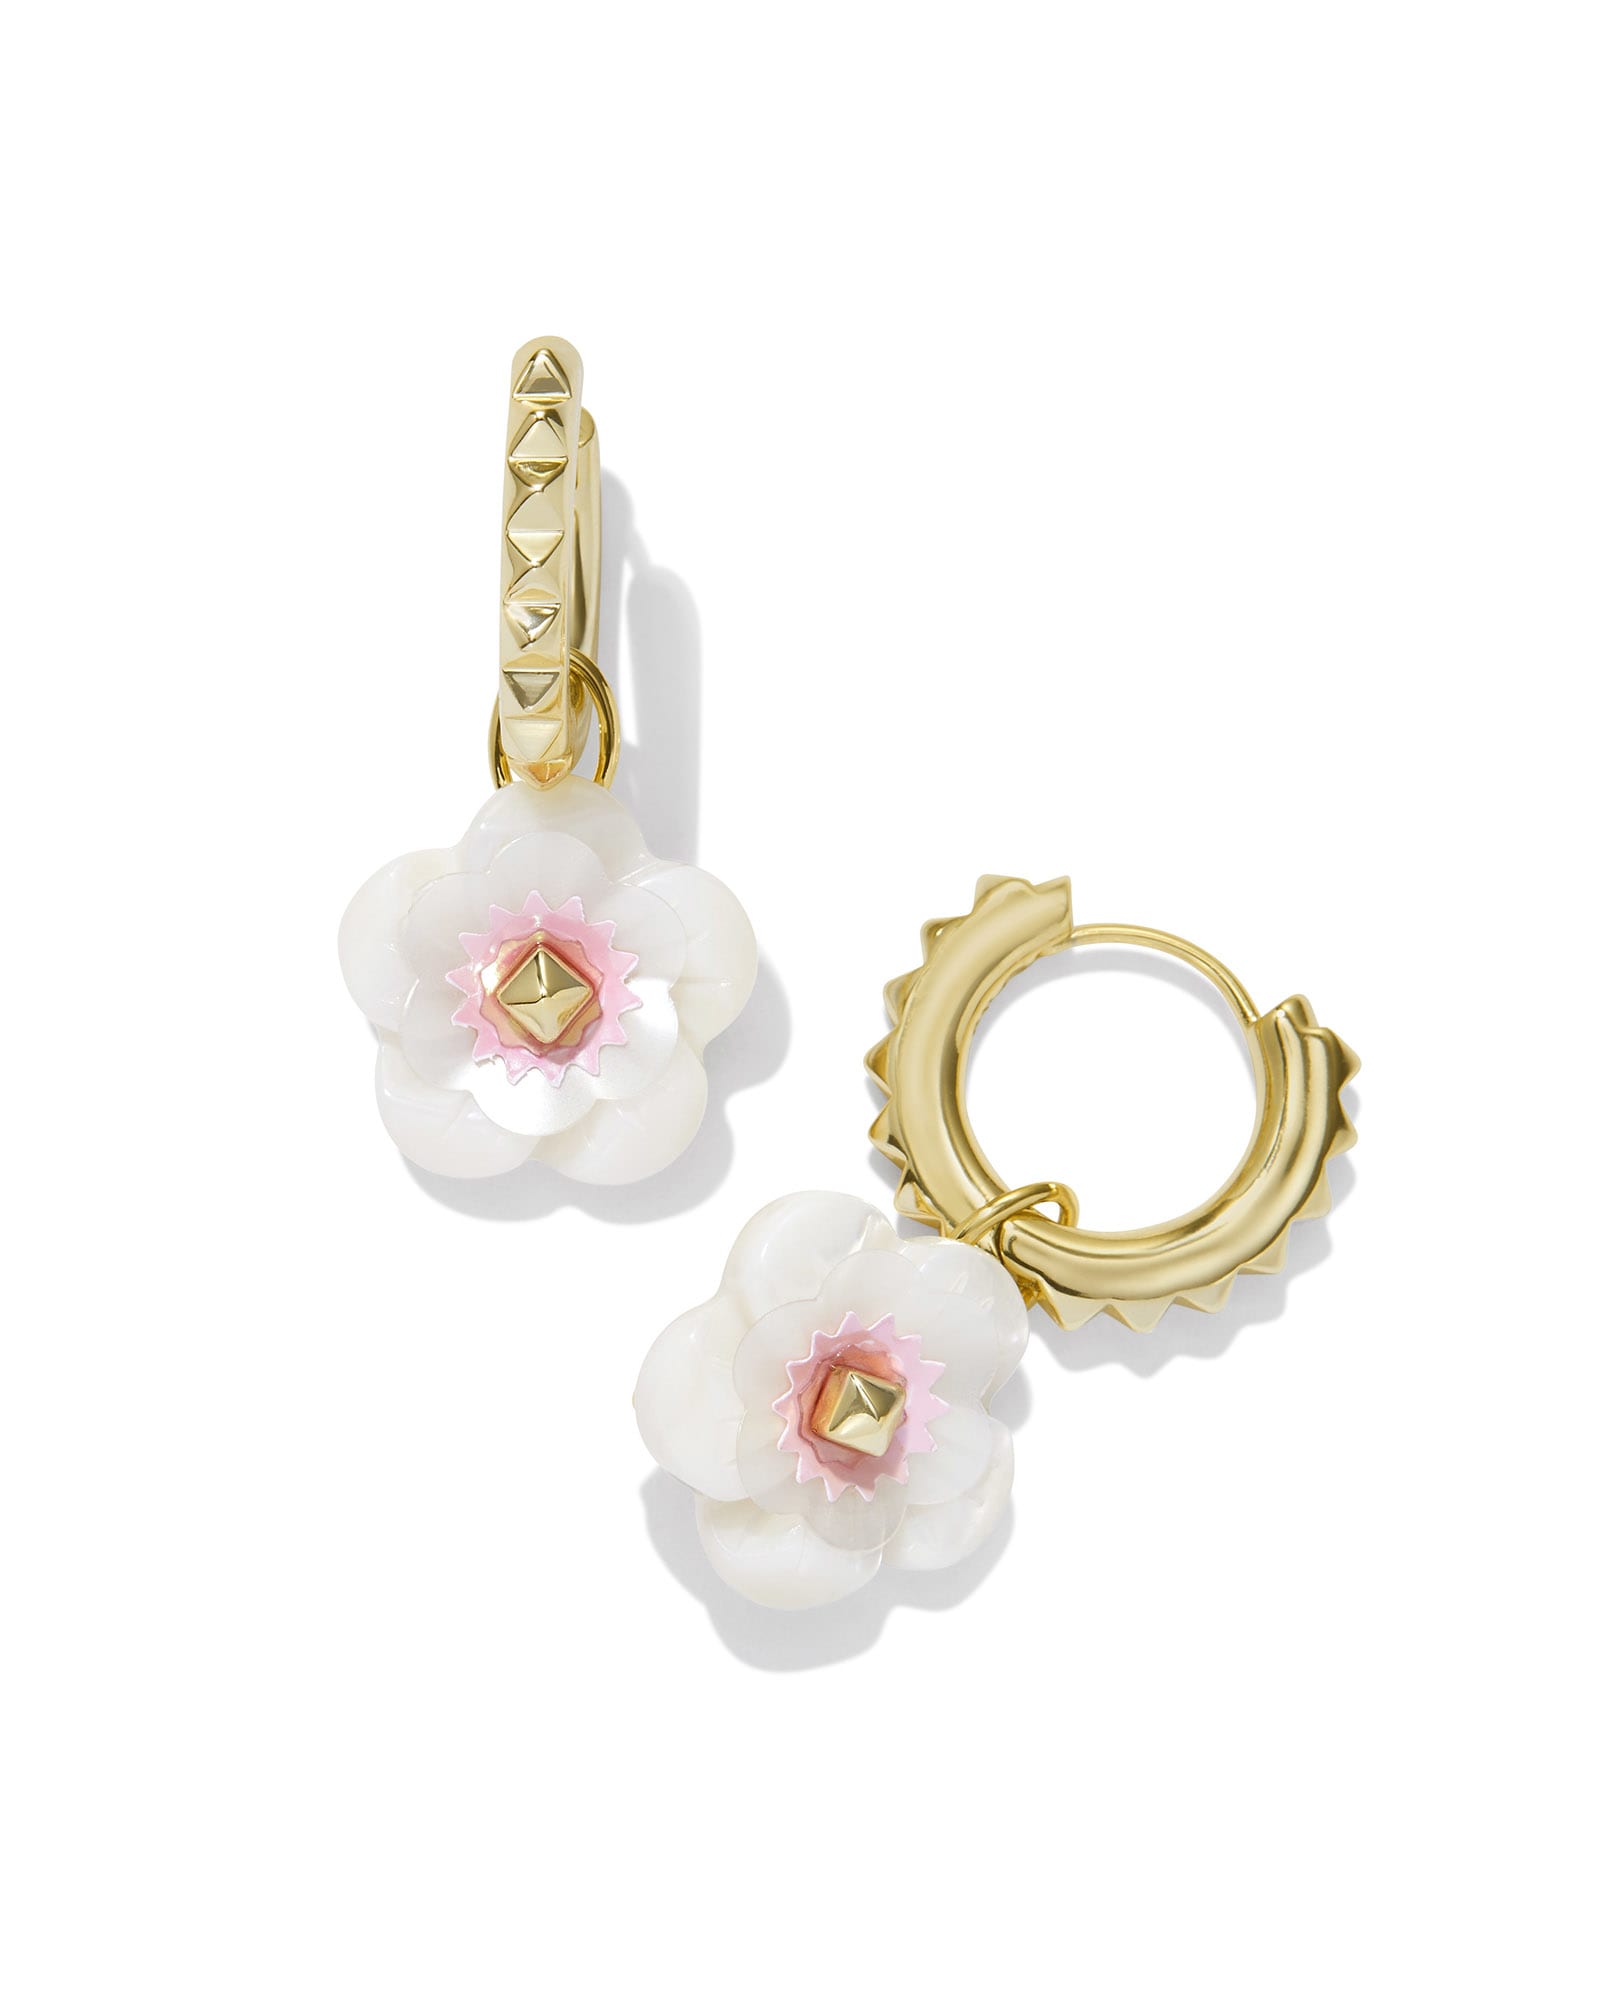 Kendra Scott Deliah Convertible Gold Huggie Earrings in Iridescent Pink White Mix   Mixed Stones